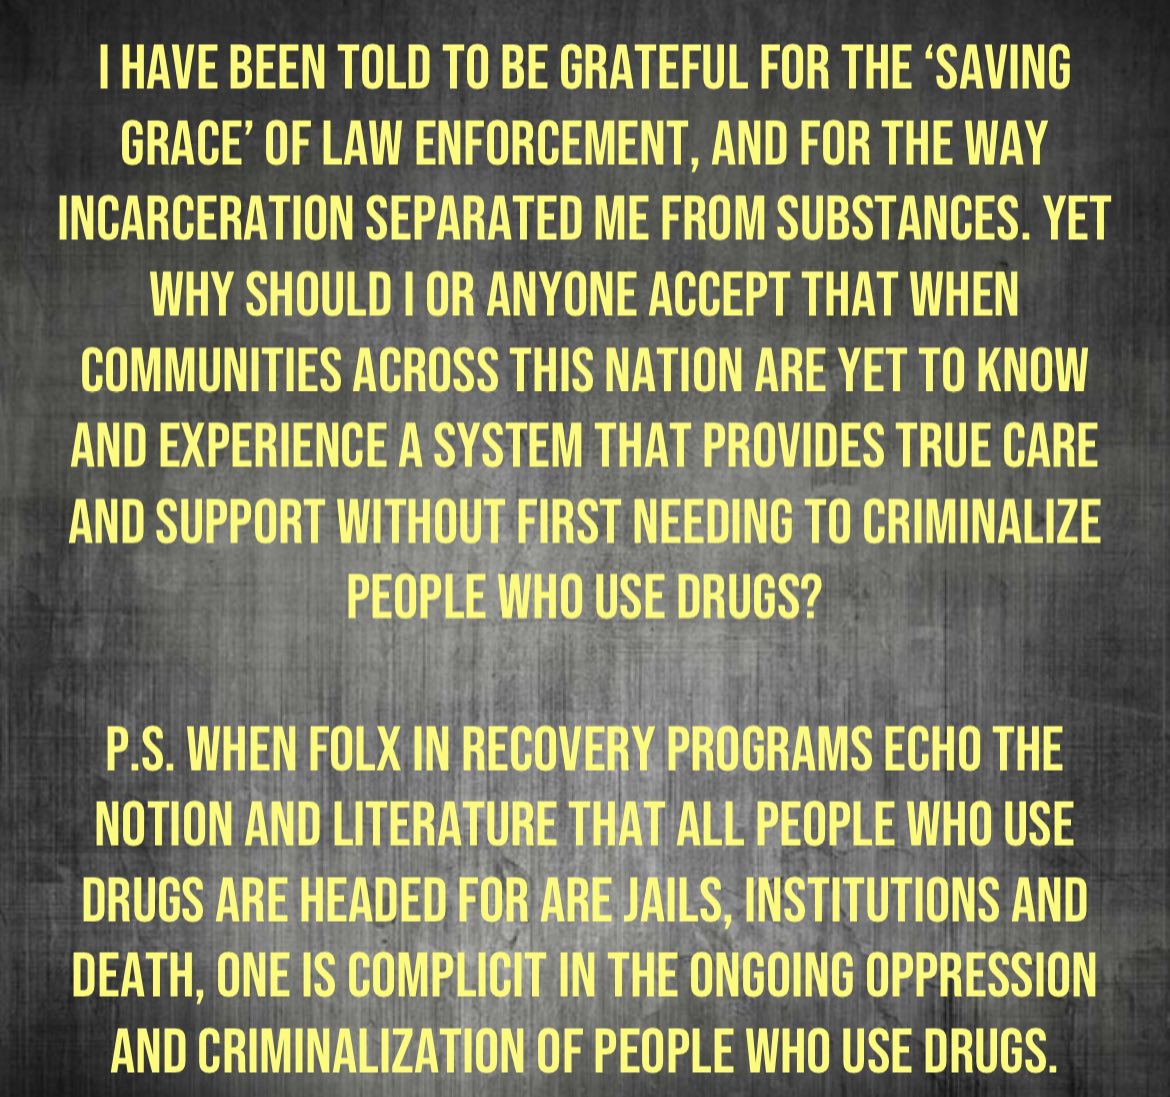 One of 90 reflections that made its way into my upcoming 2nd book; also relatively timely for those of us in Washington State.
•
#substanceusedisorder #drugpolicy #endthedrugwar #harmreduction #druguseisapublichealthissue #publichealth #recovery #addiction #opioidcrisis #drugs